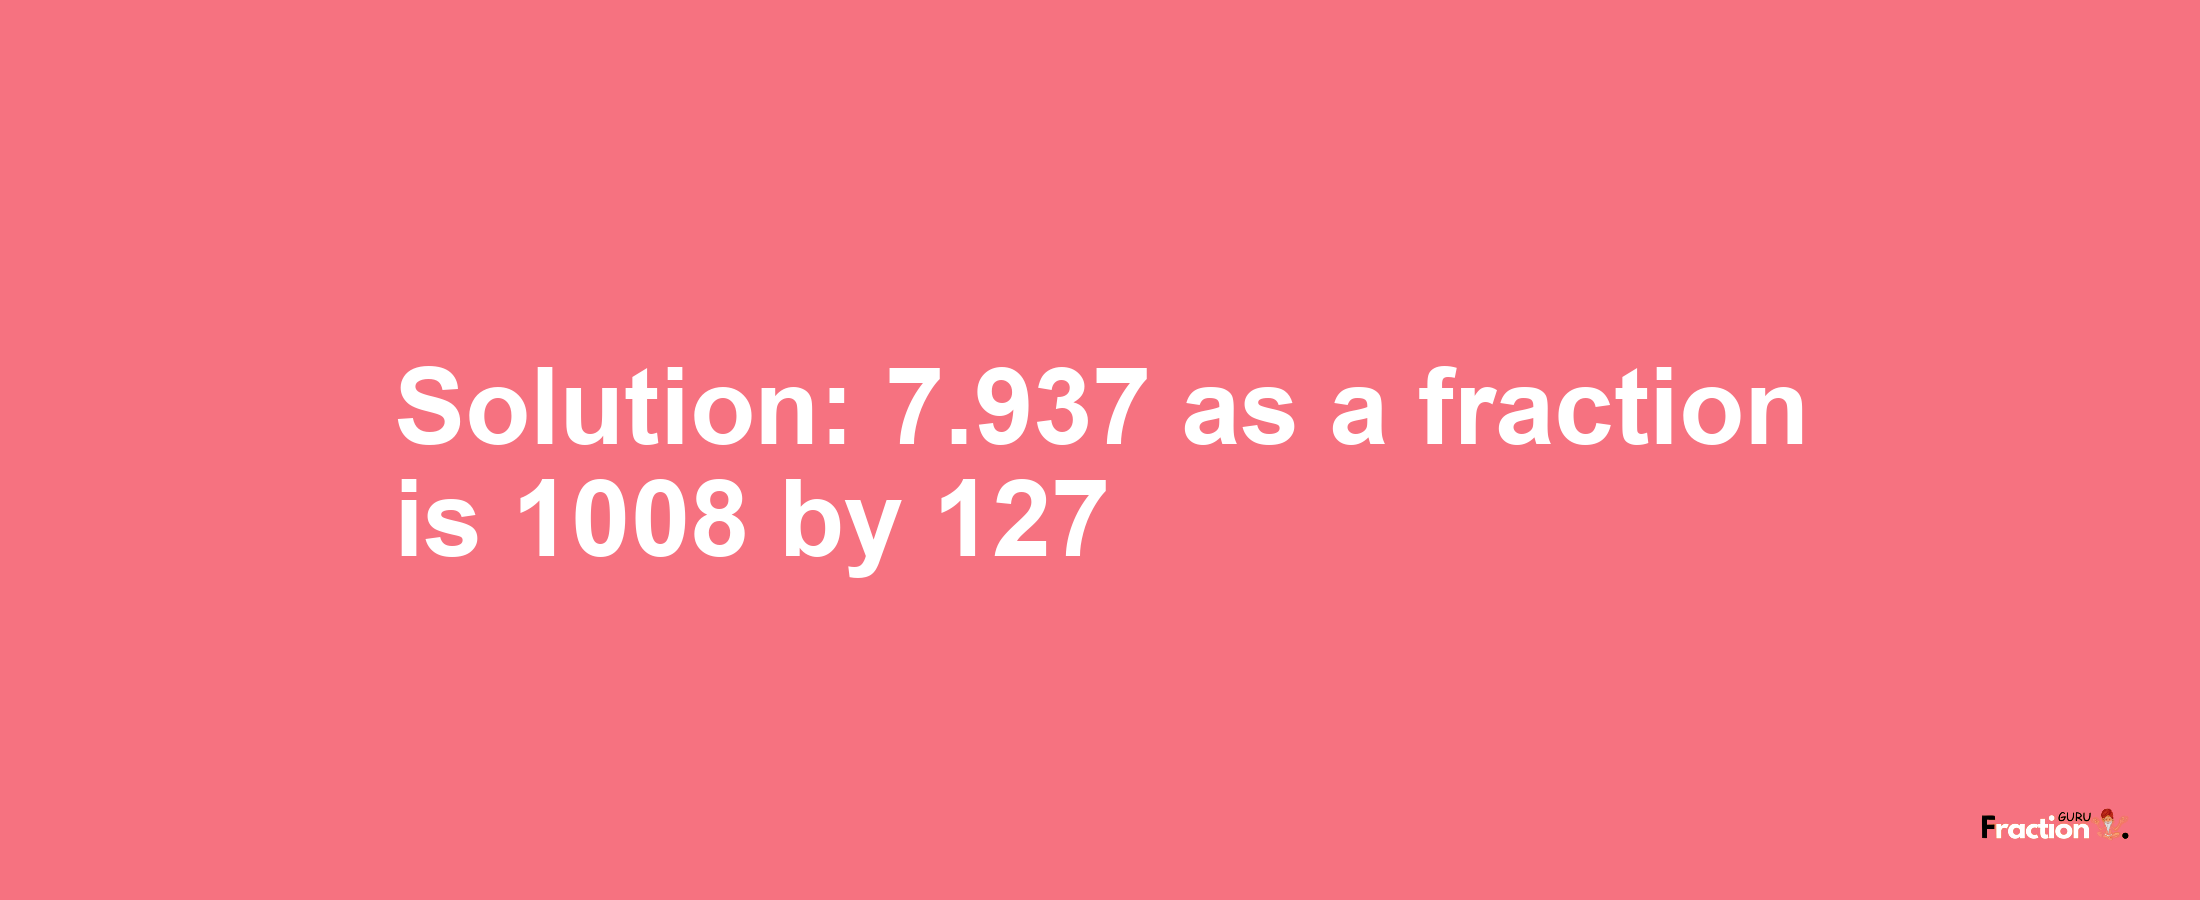 Solution:7.937 as a fraction is 1008/127